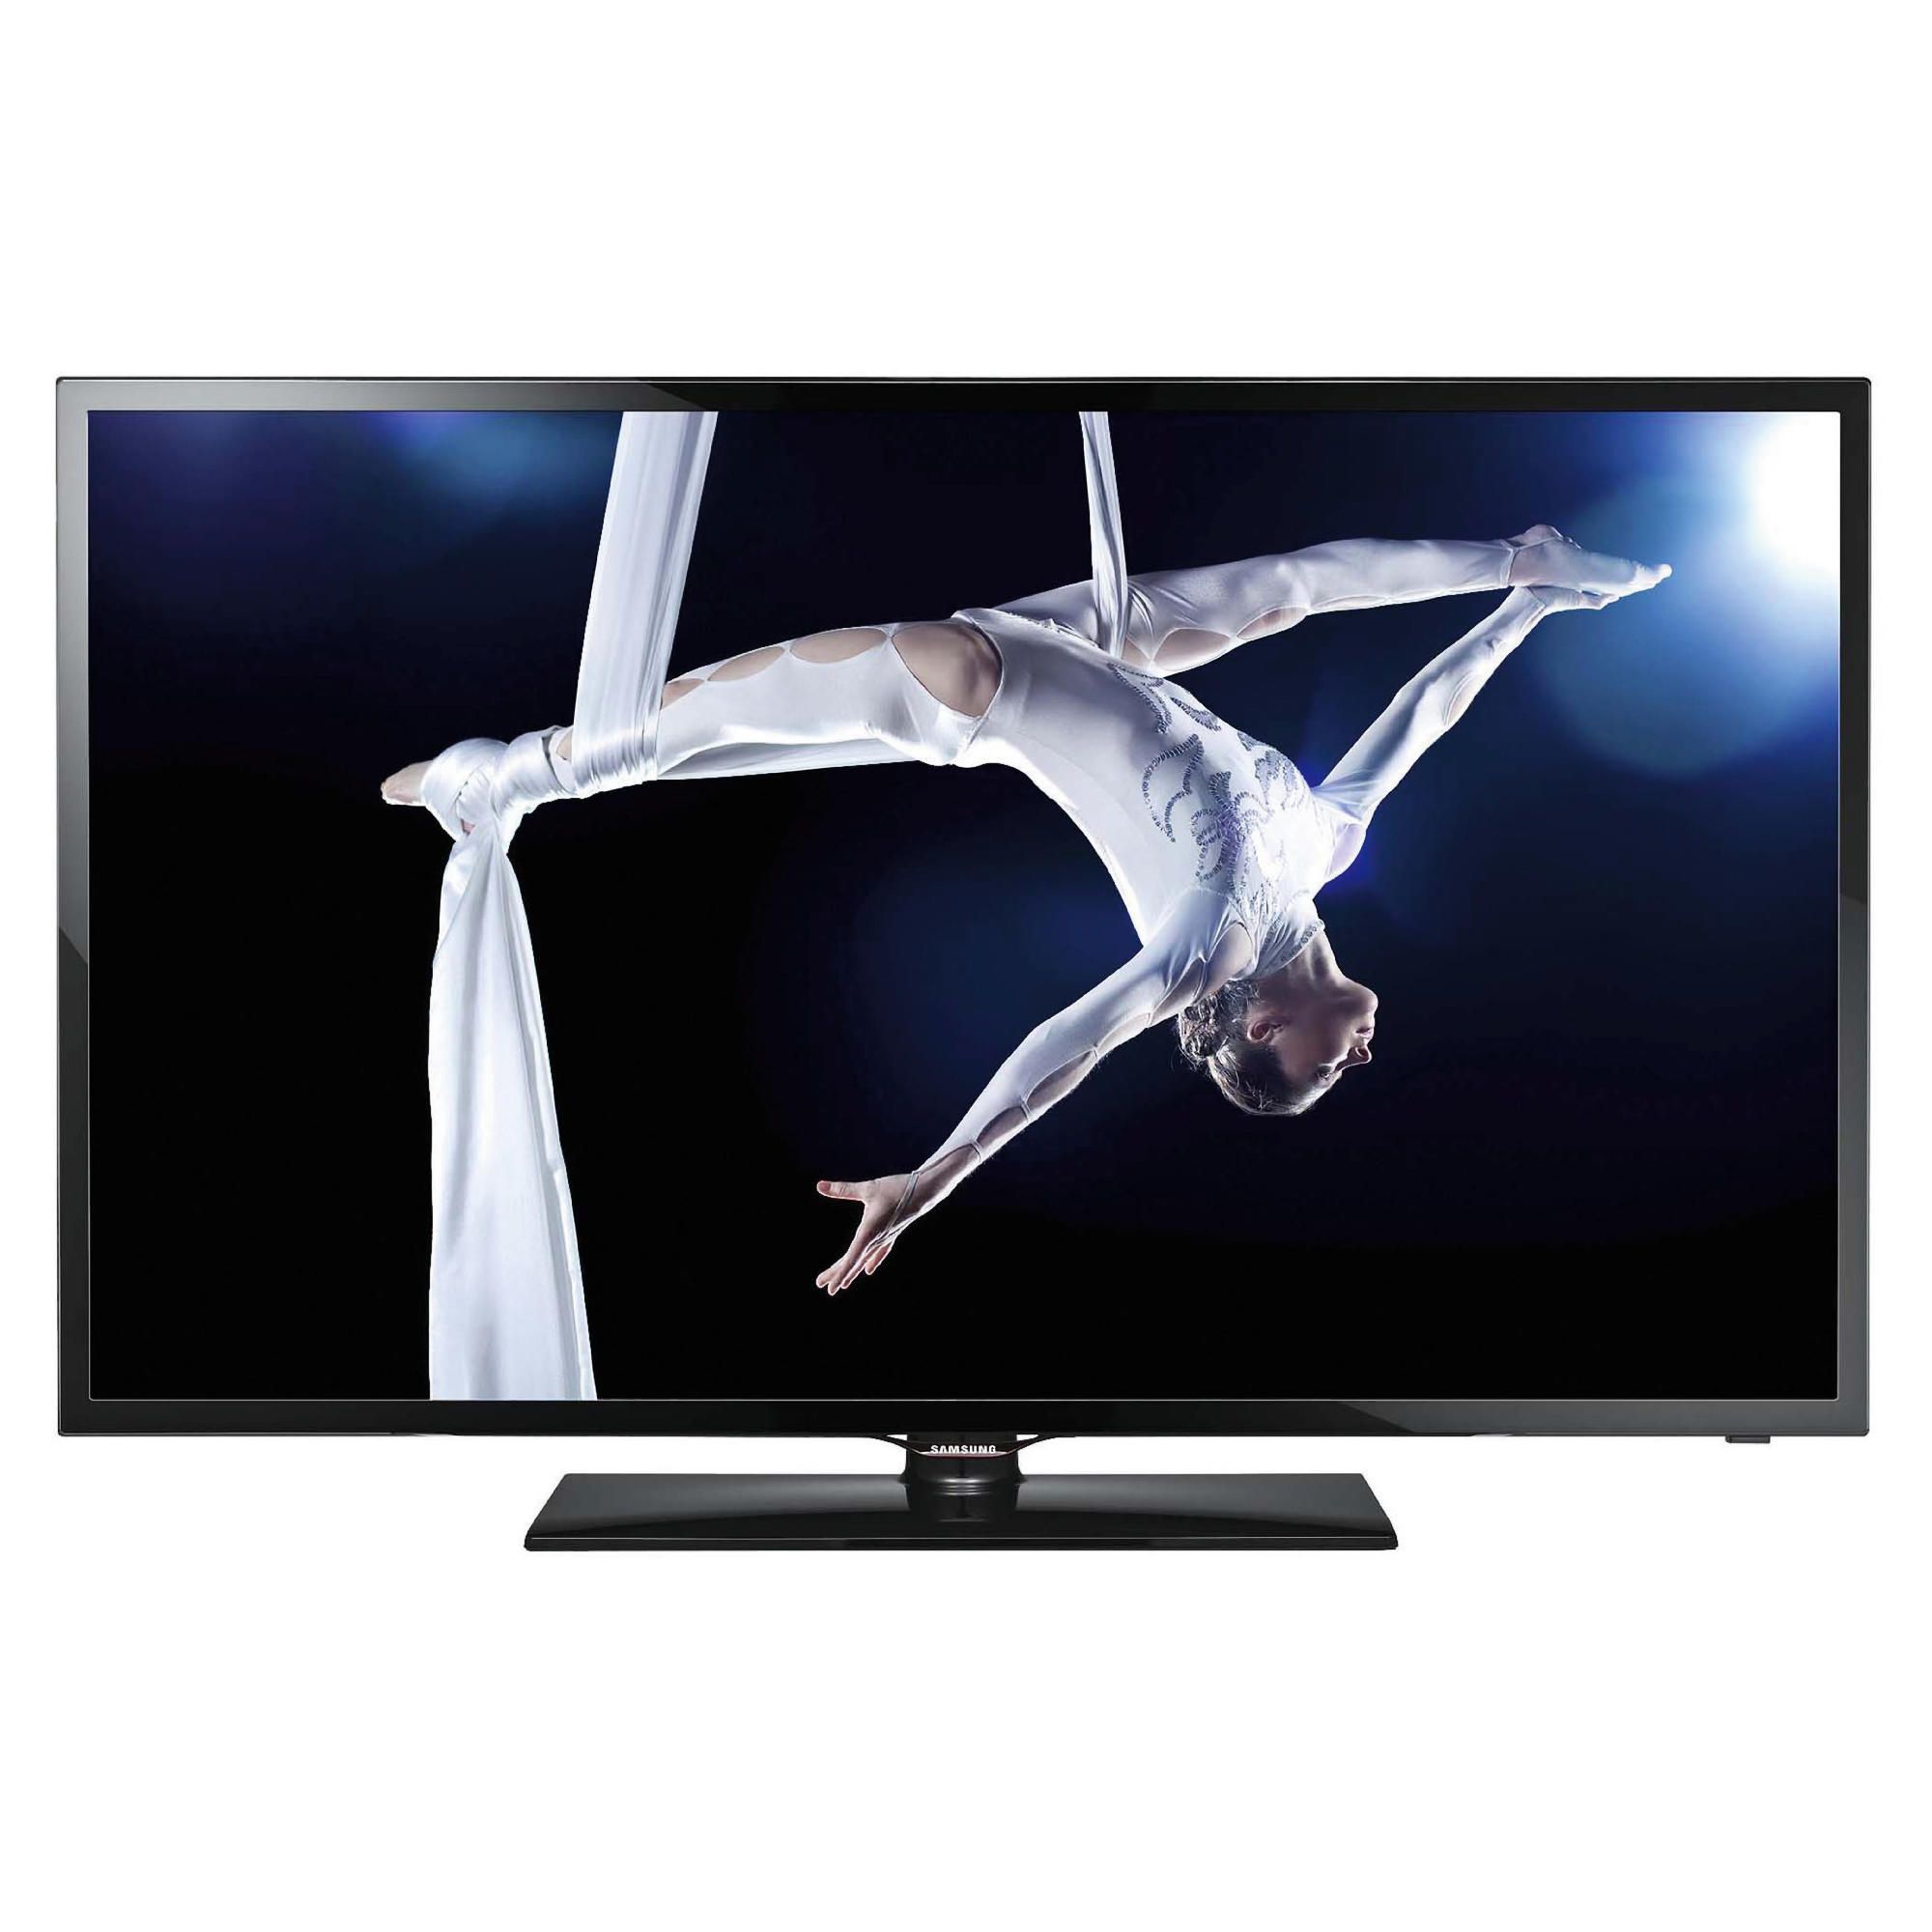 Samsung UE32F5000 32inch Full HD 1080p LED TV with Freeview HD